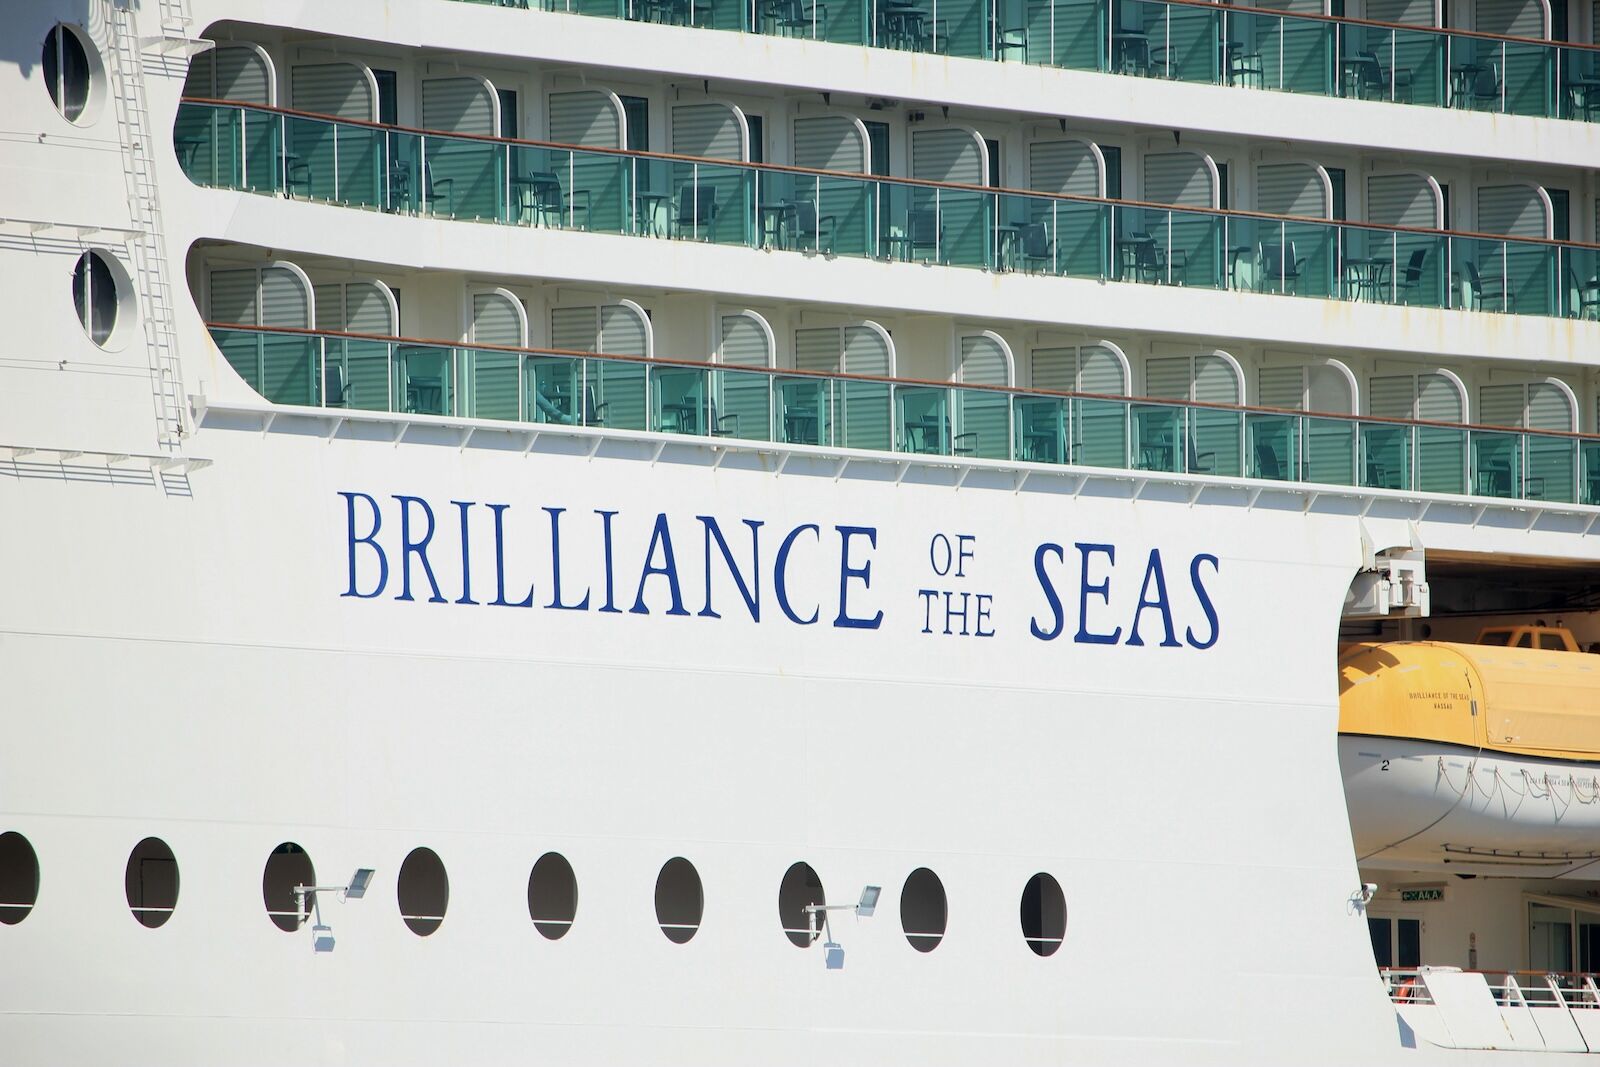 Velsen, the Netherlands - April, 20 2018: Velsen, the Netherlands - April, 20 2018: MS Brilliance of the Seas in North Sea Canal, detail of name